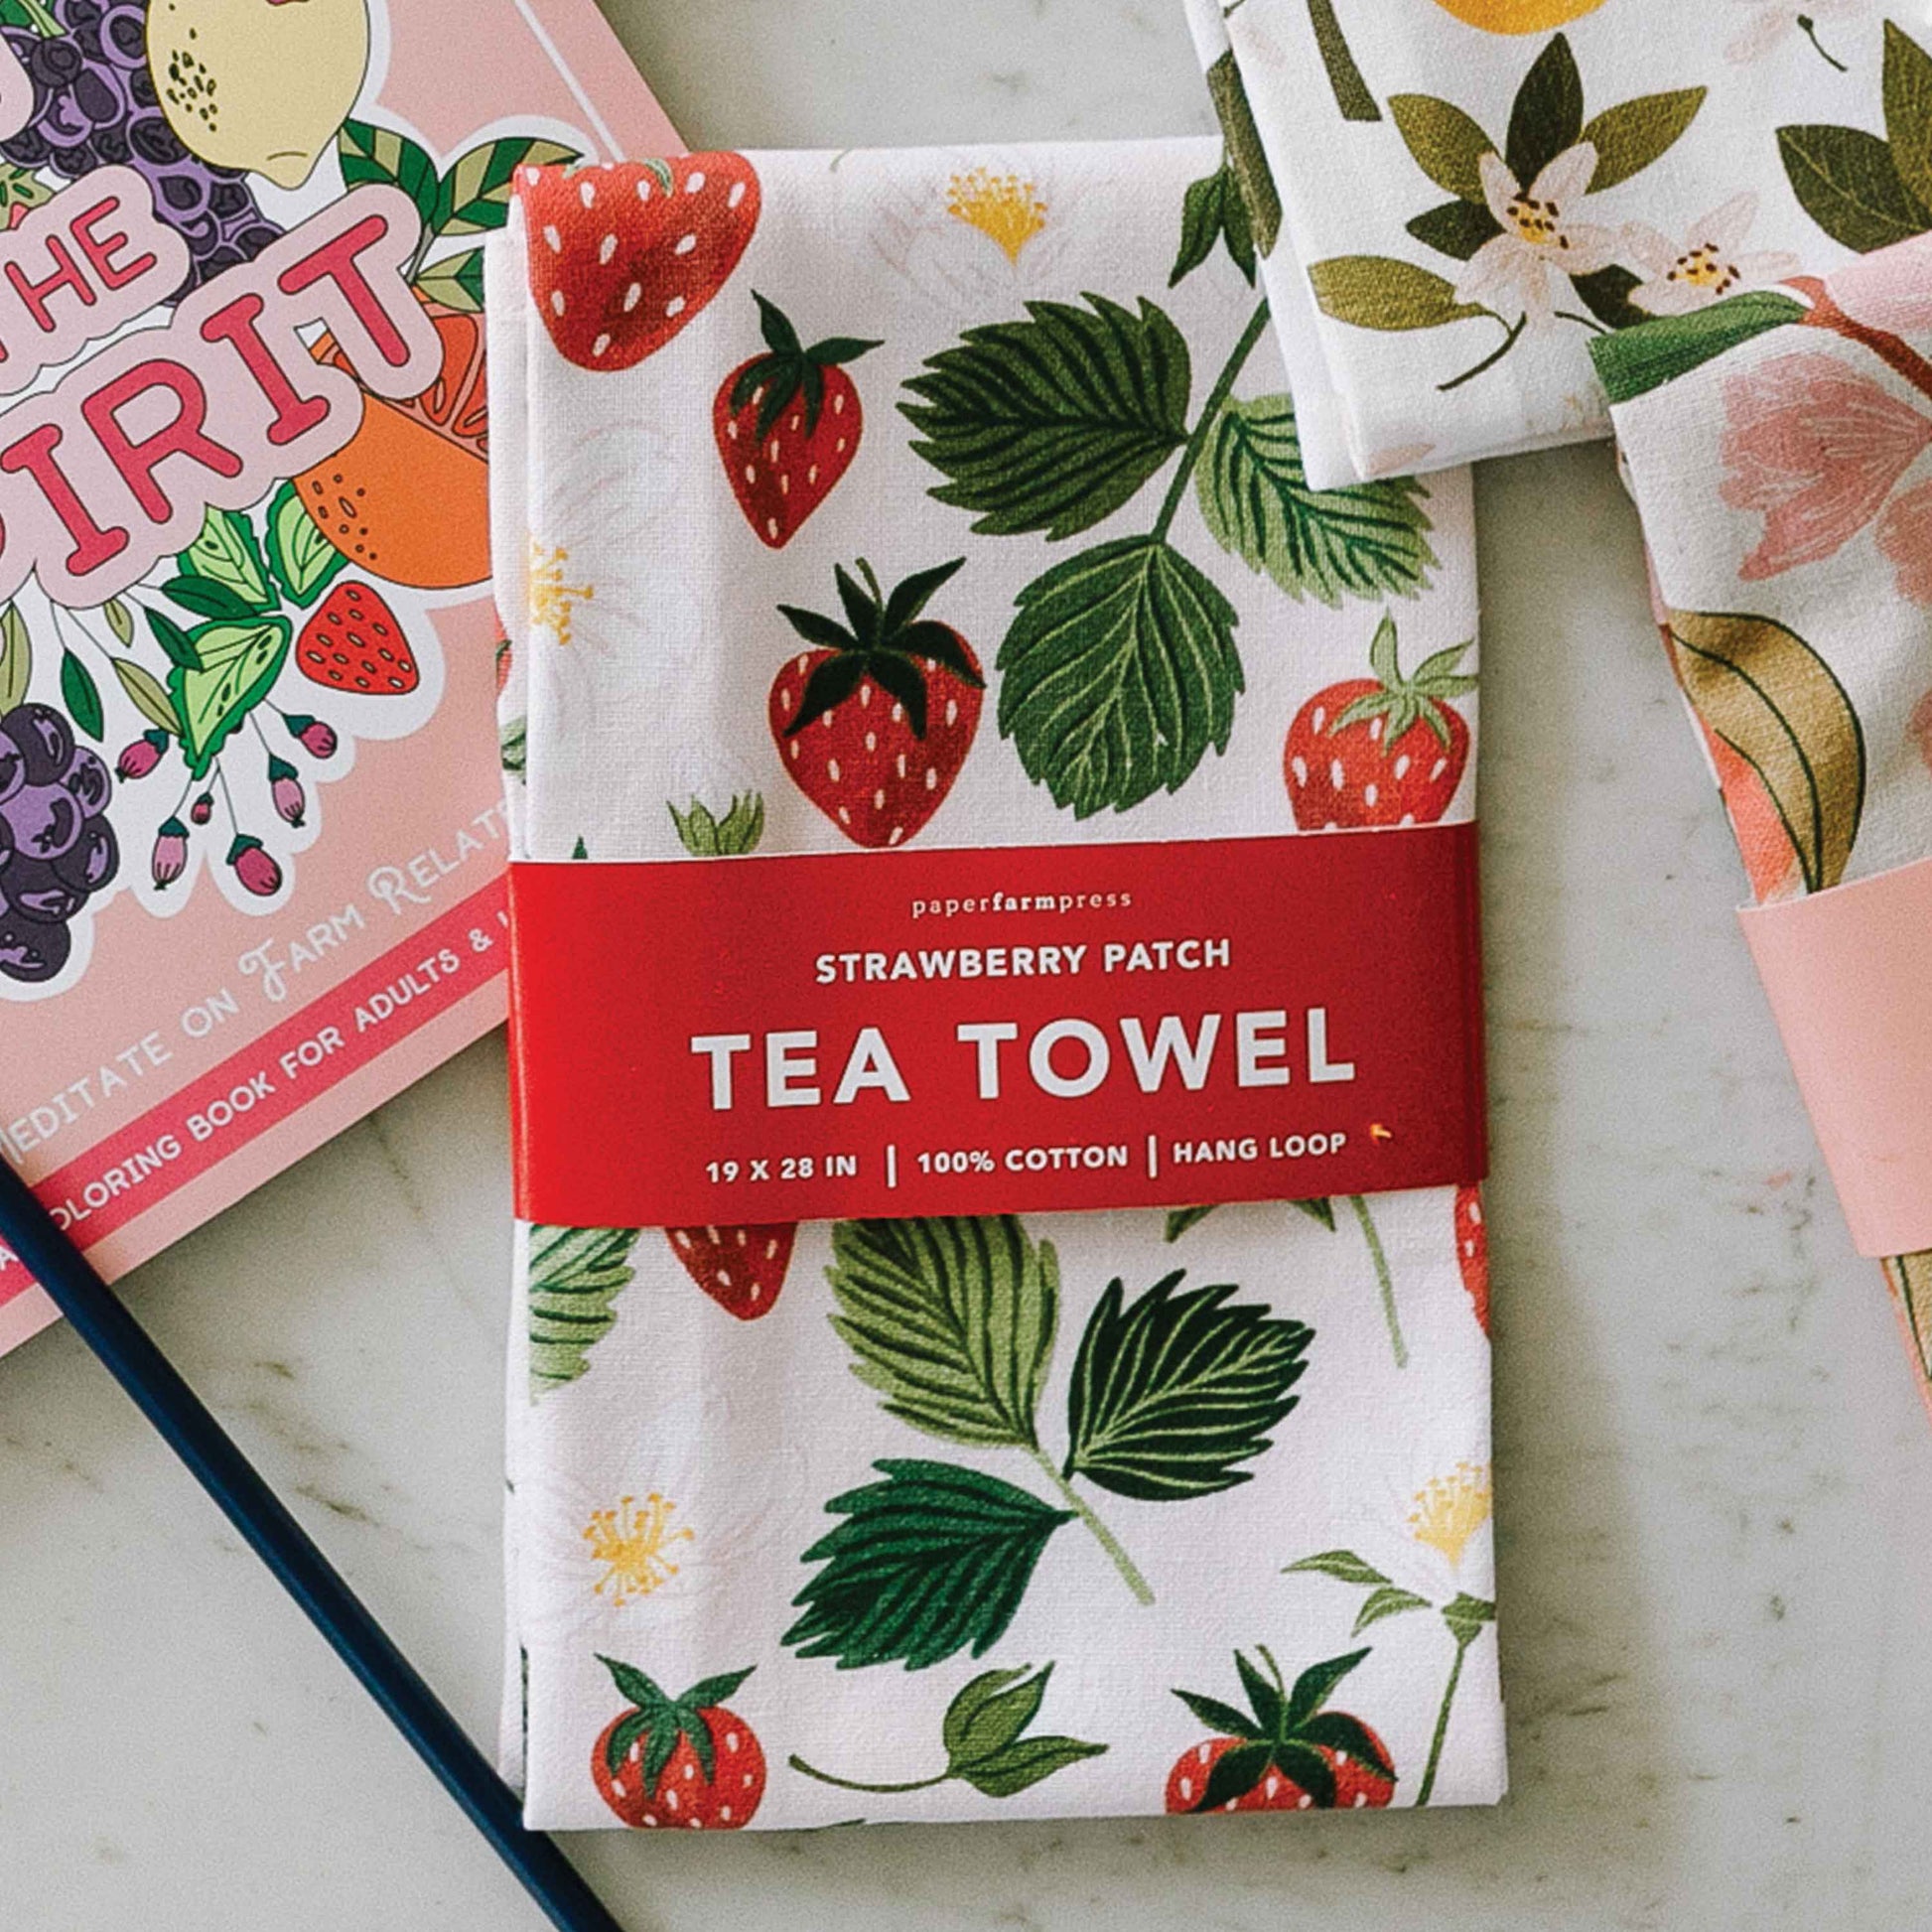 Tea towel in strawberry patch print, shown in packaging 